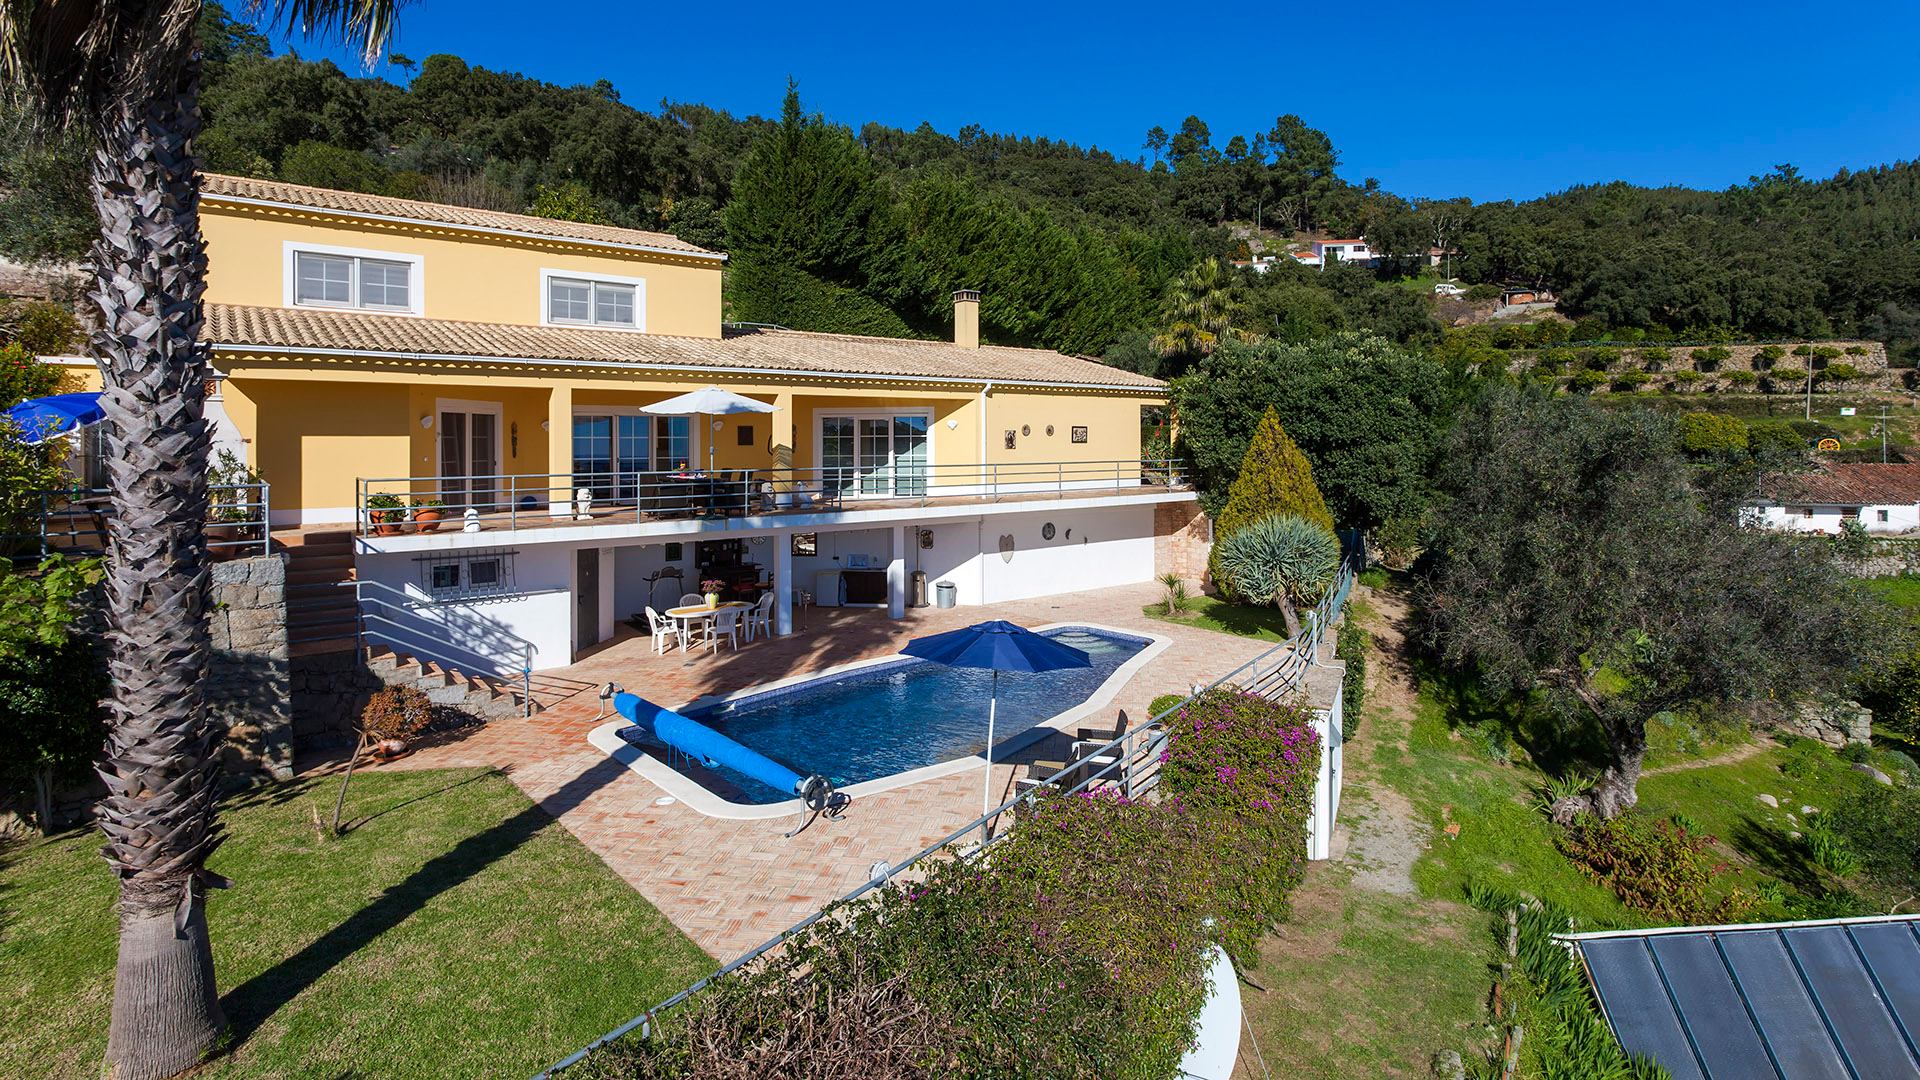  3 bedroom country house with pool on hillside with beautiful sea views, Serra de Monchique | LG2001 